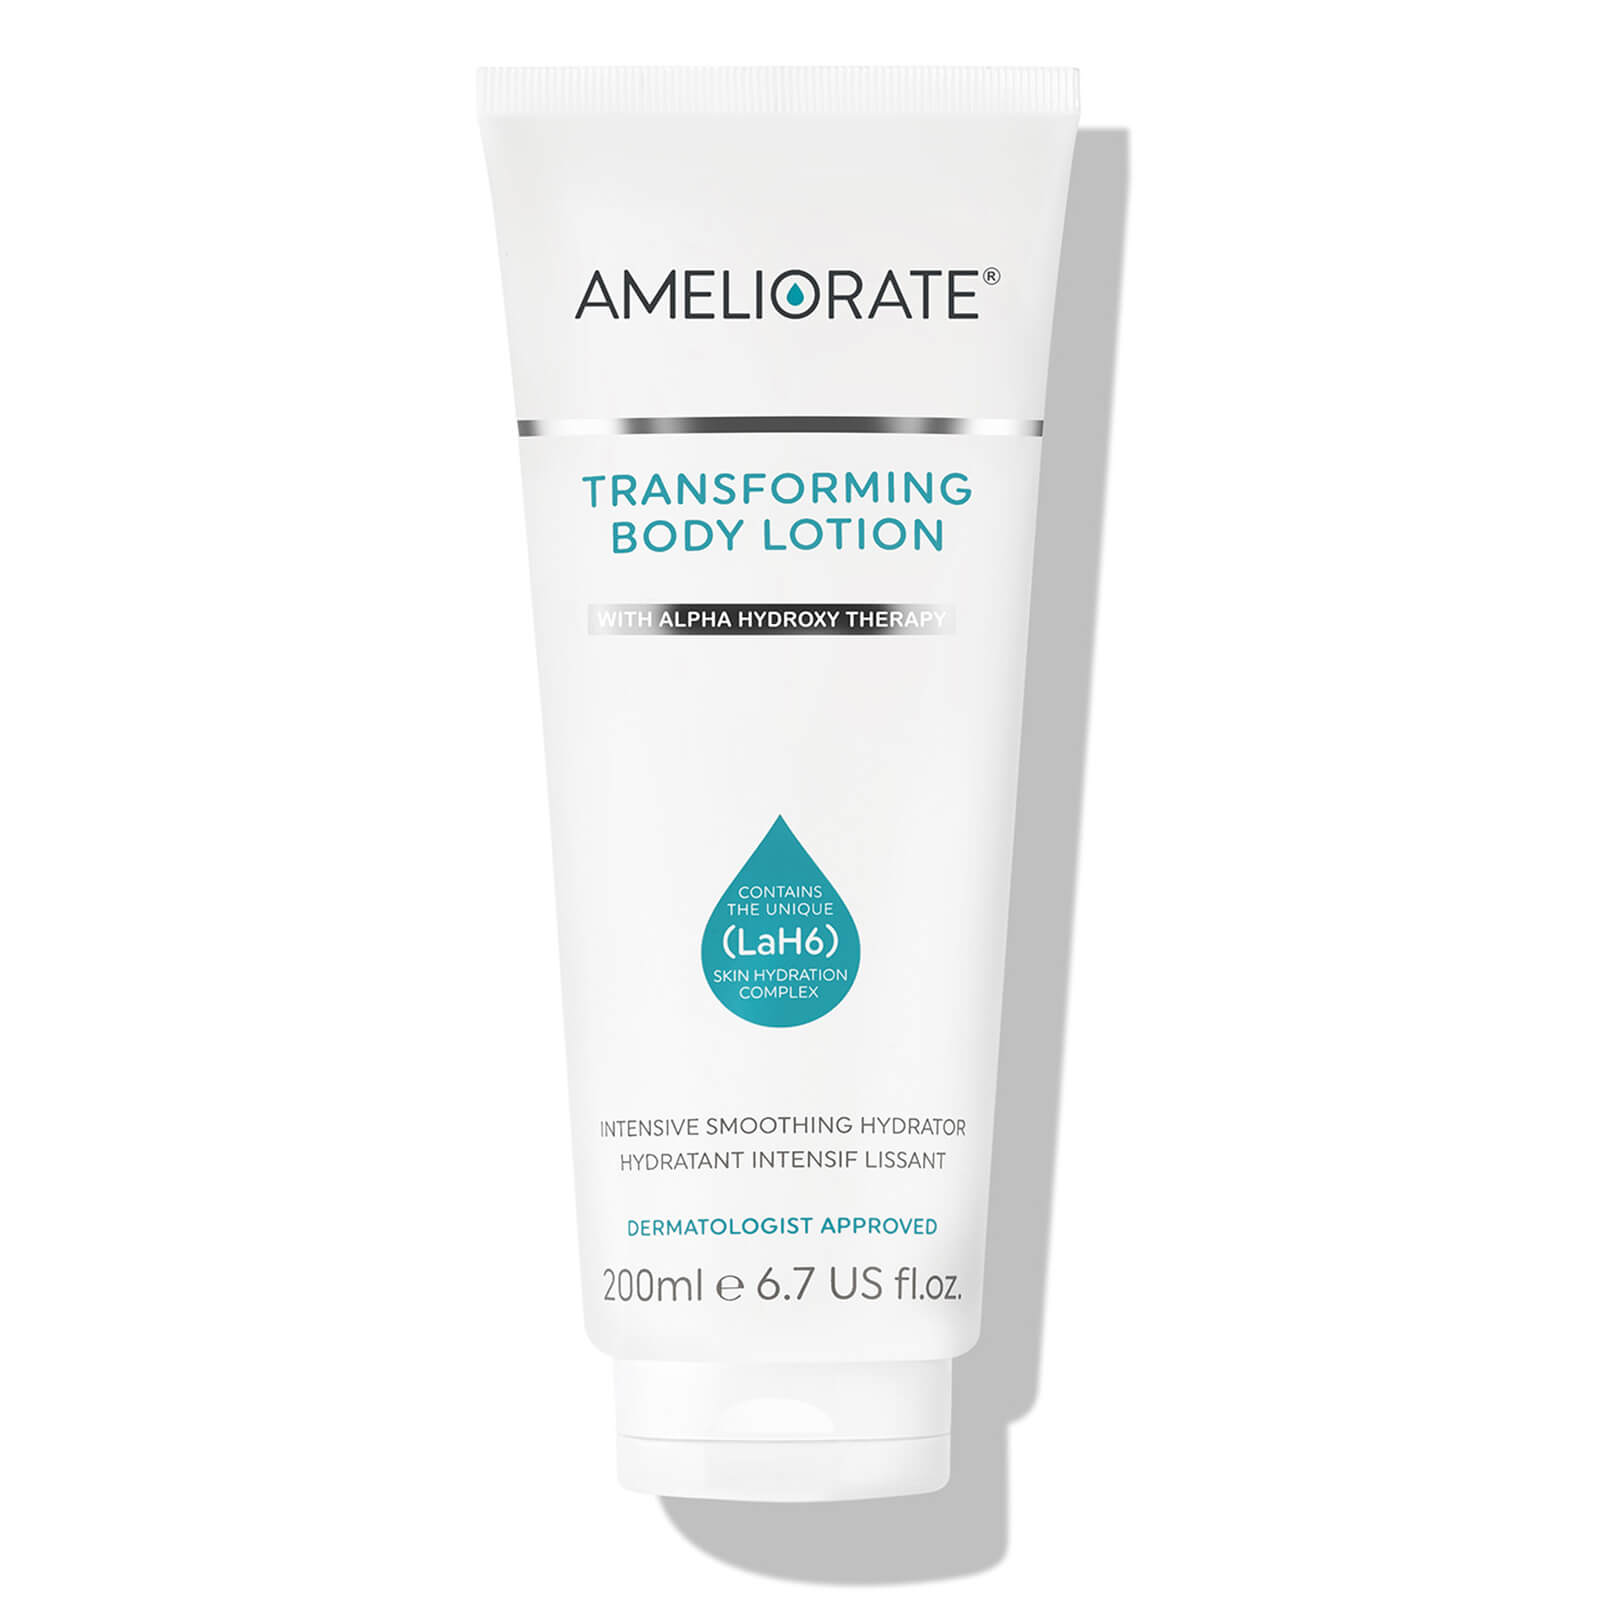 Image of AMELIORATE Transforming Body Lotion - 200ml